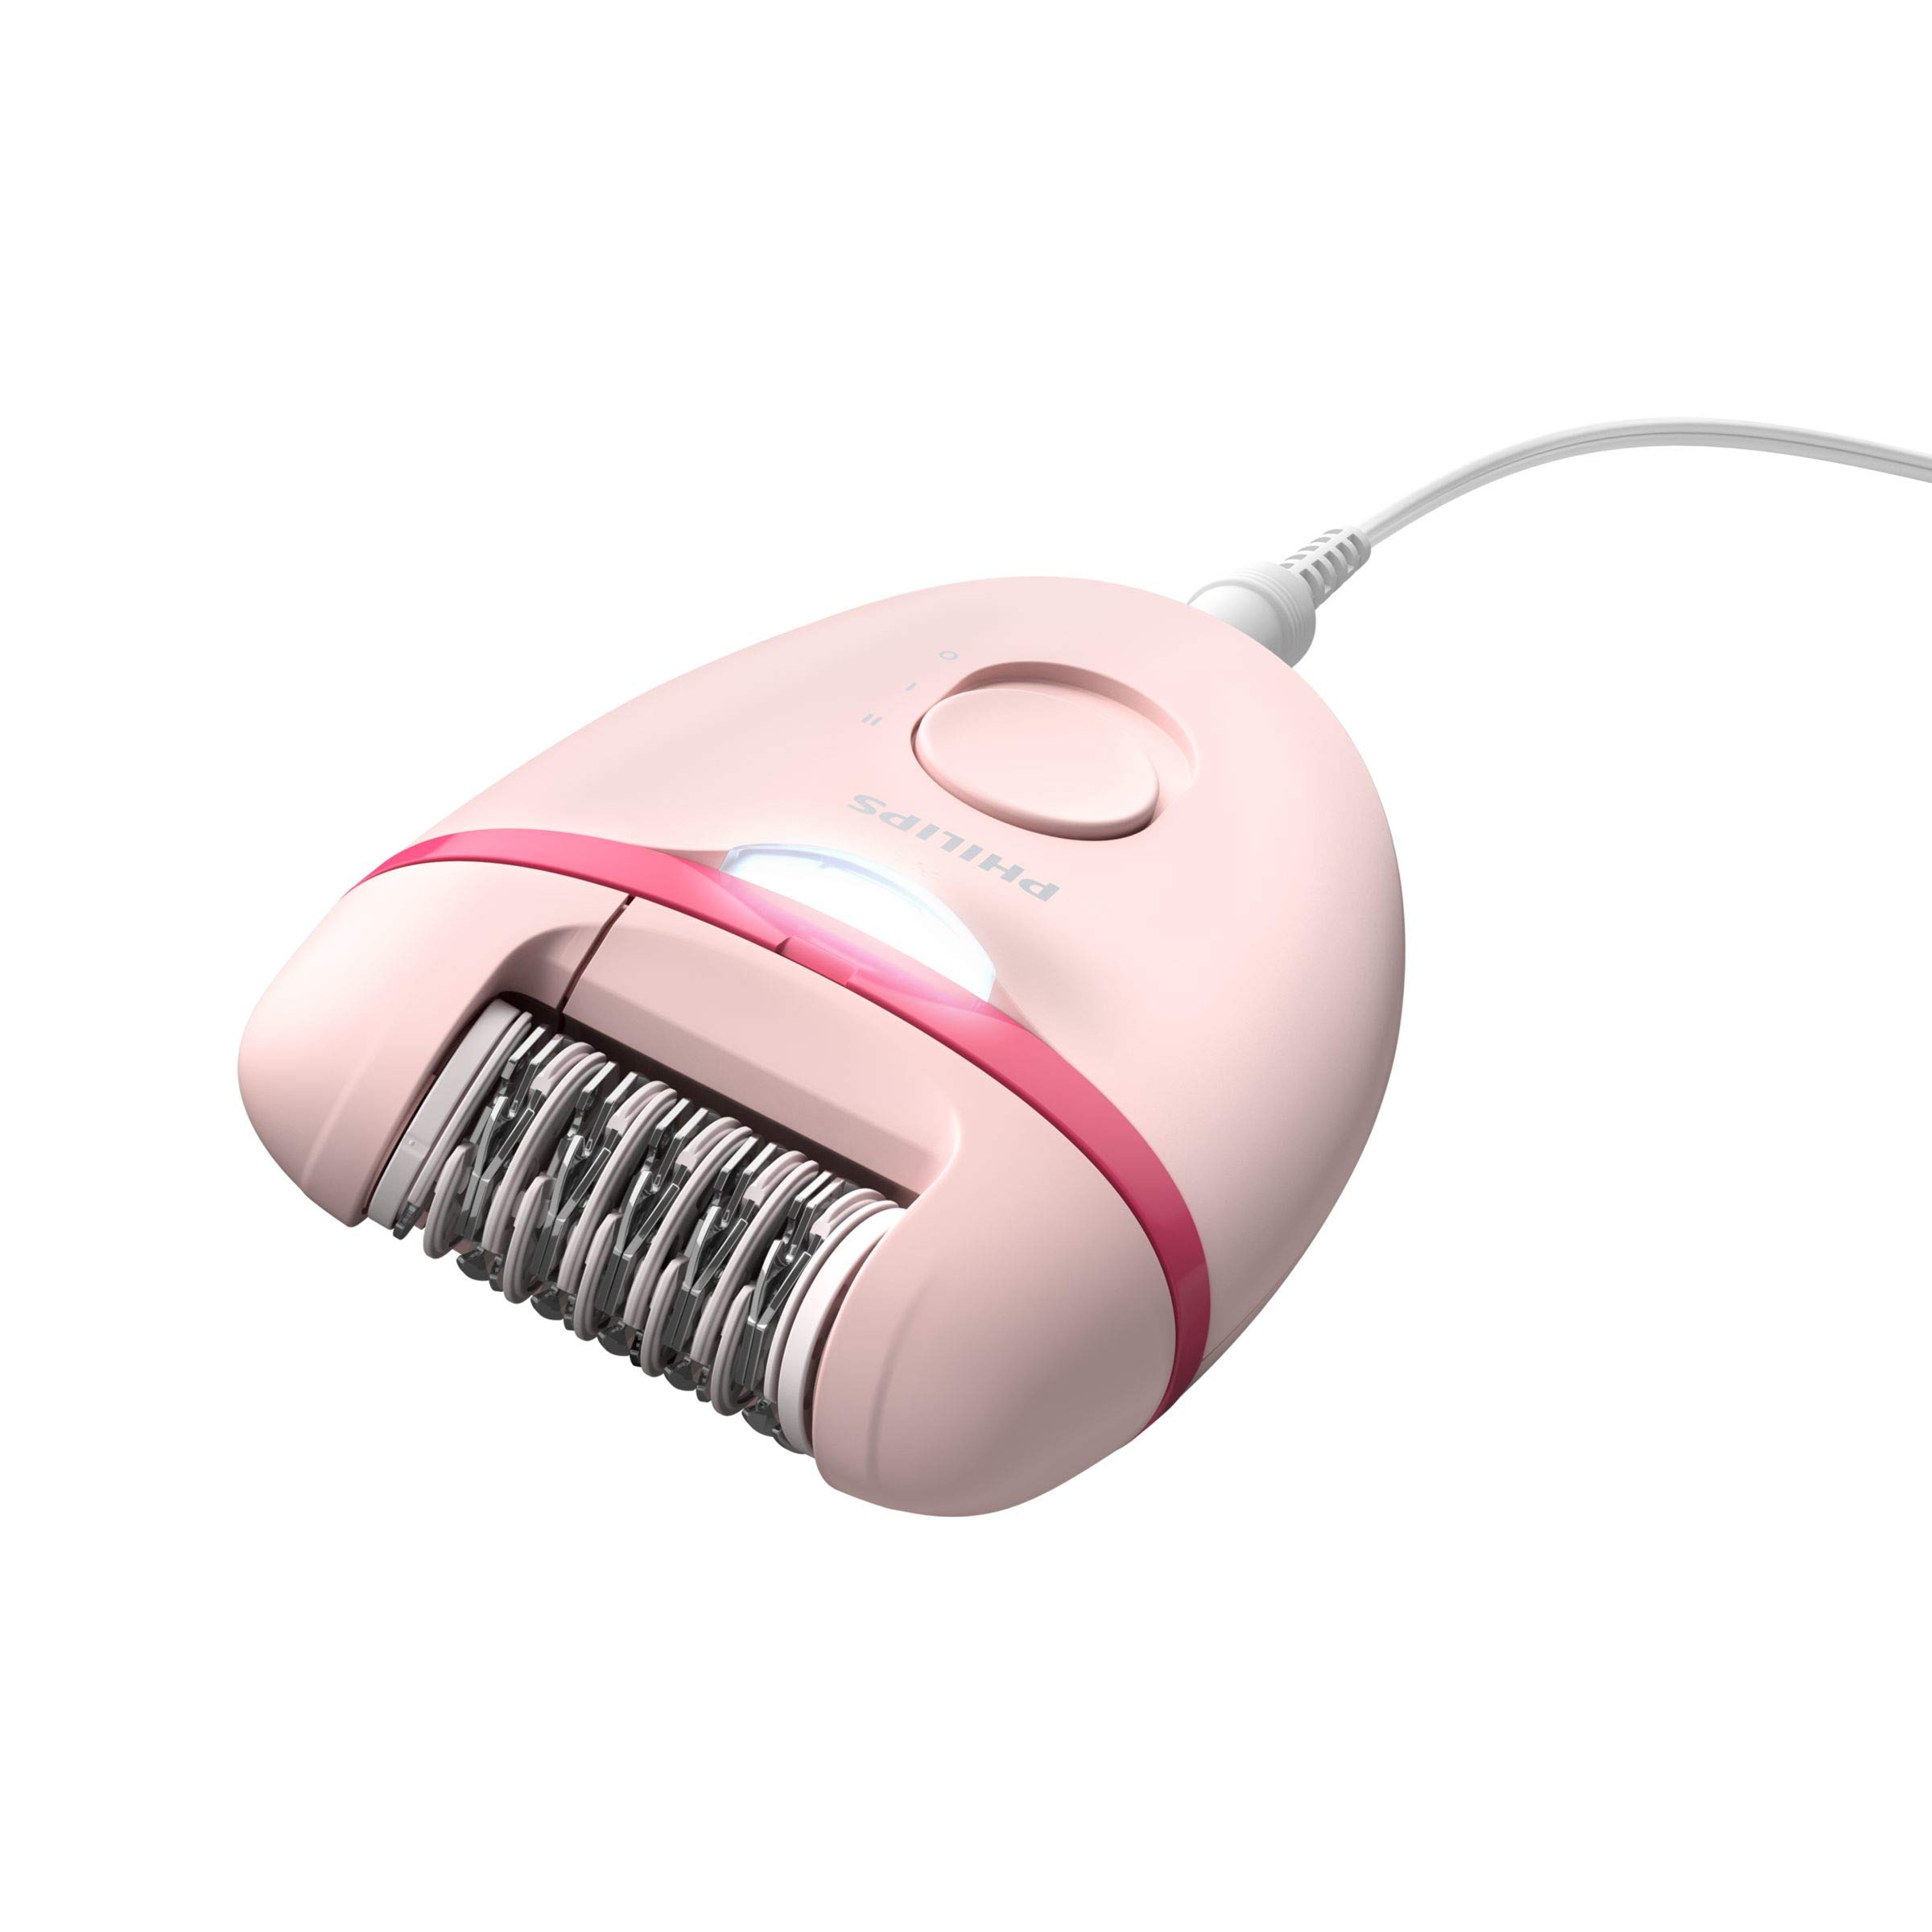 Philips Satinelle Essential Epilator, Corded Hair Removal BRE285/00